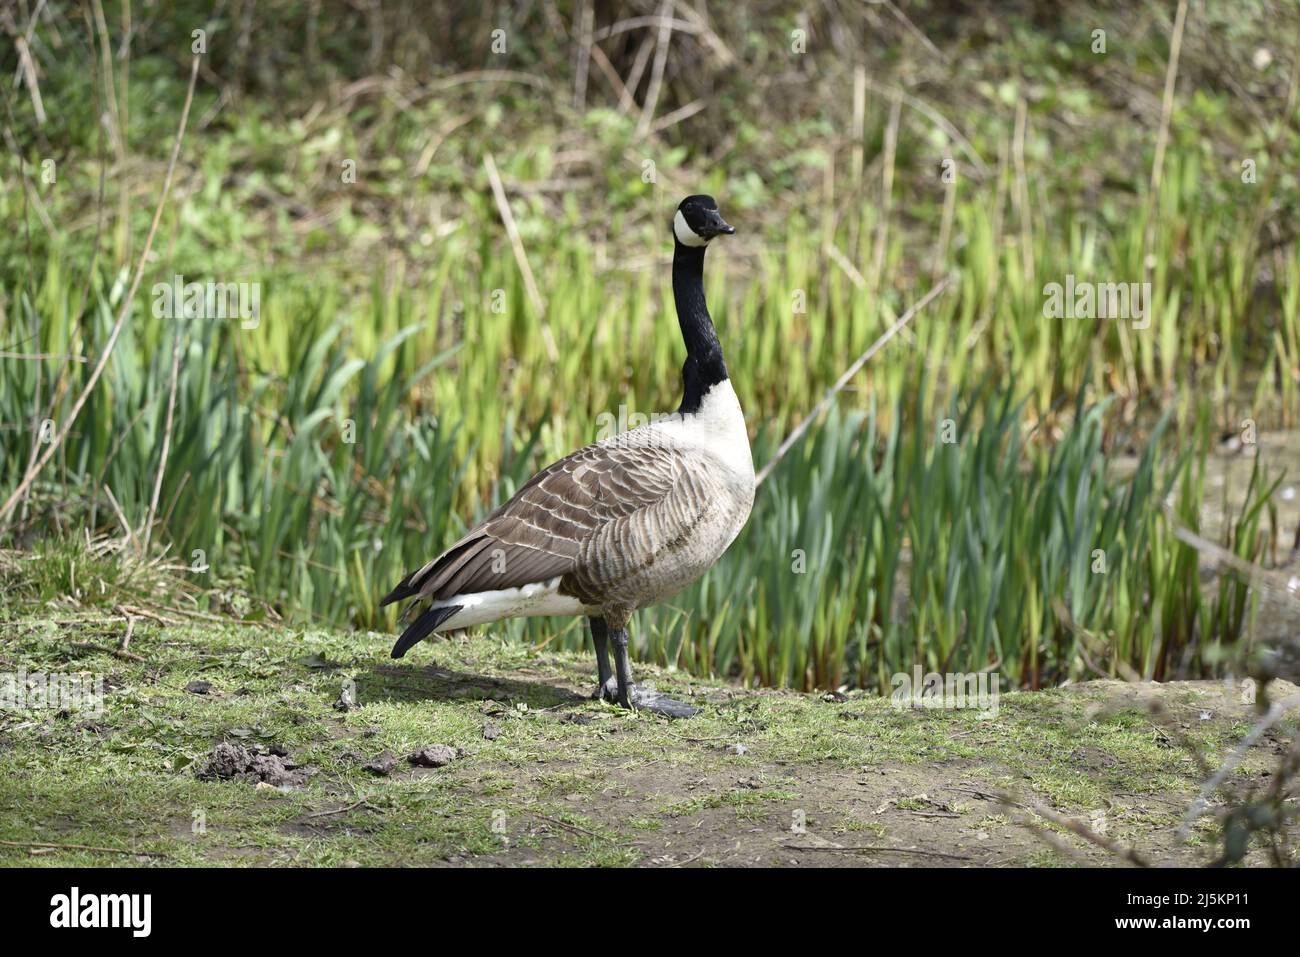 Full-Body, Right-Profile Portrait of a Canada Goose (Anser canadensis) Standing at the Waters Edge with Tall Green Grass Background on a Sunny Day Stock Photo